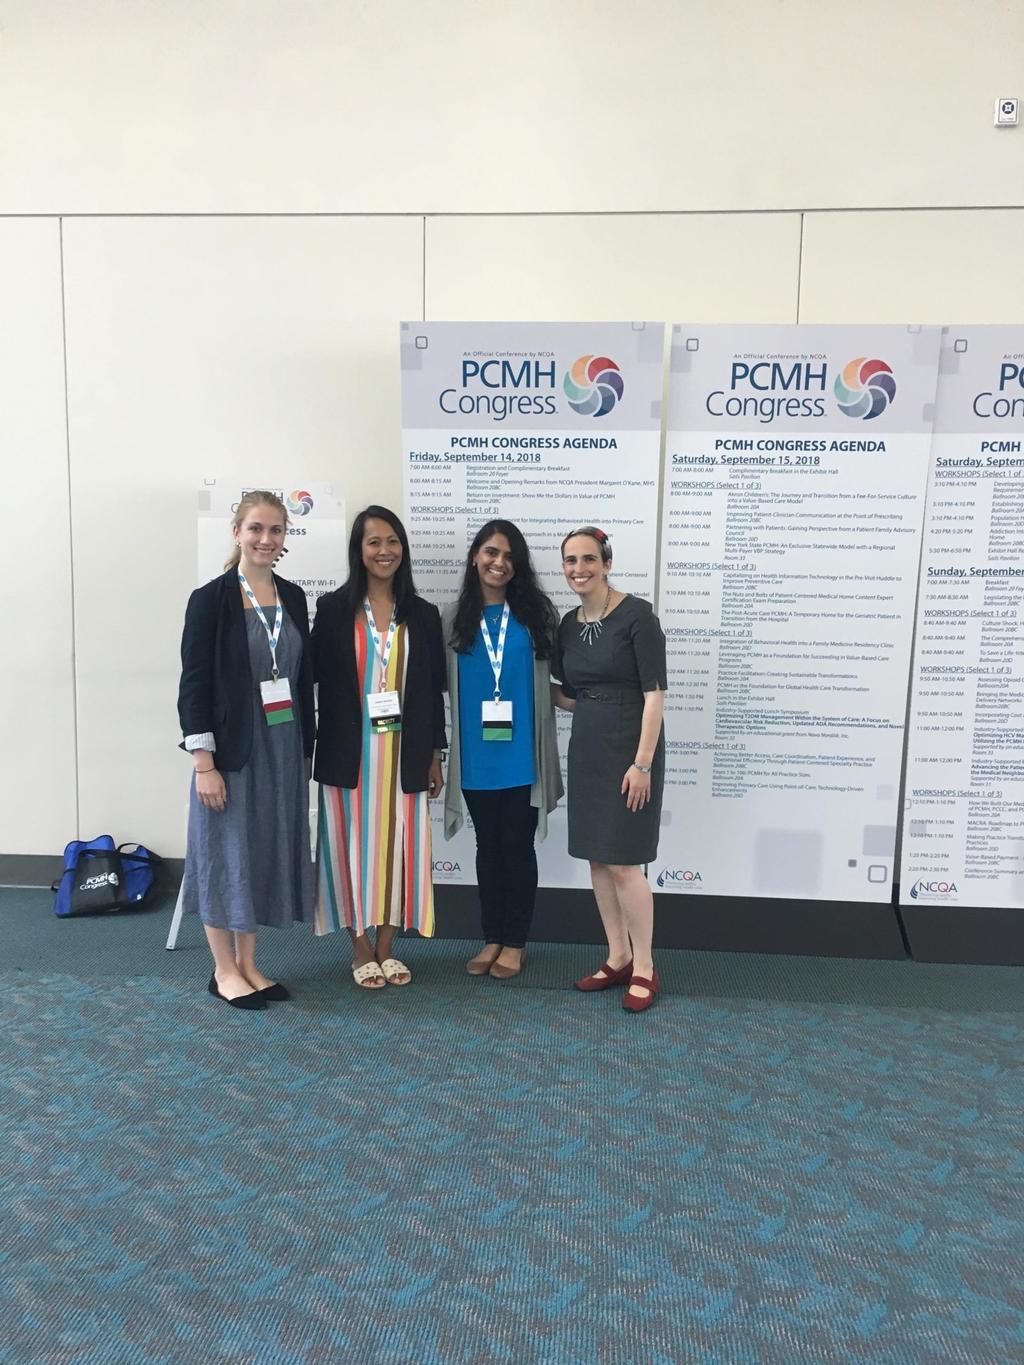 PCMH Congress 2018 Highlights PCMH Congress is an annual conference hosted by the National Committee for Quality Assurance (NCQA) where healthcare providers and program experts share successes,